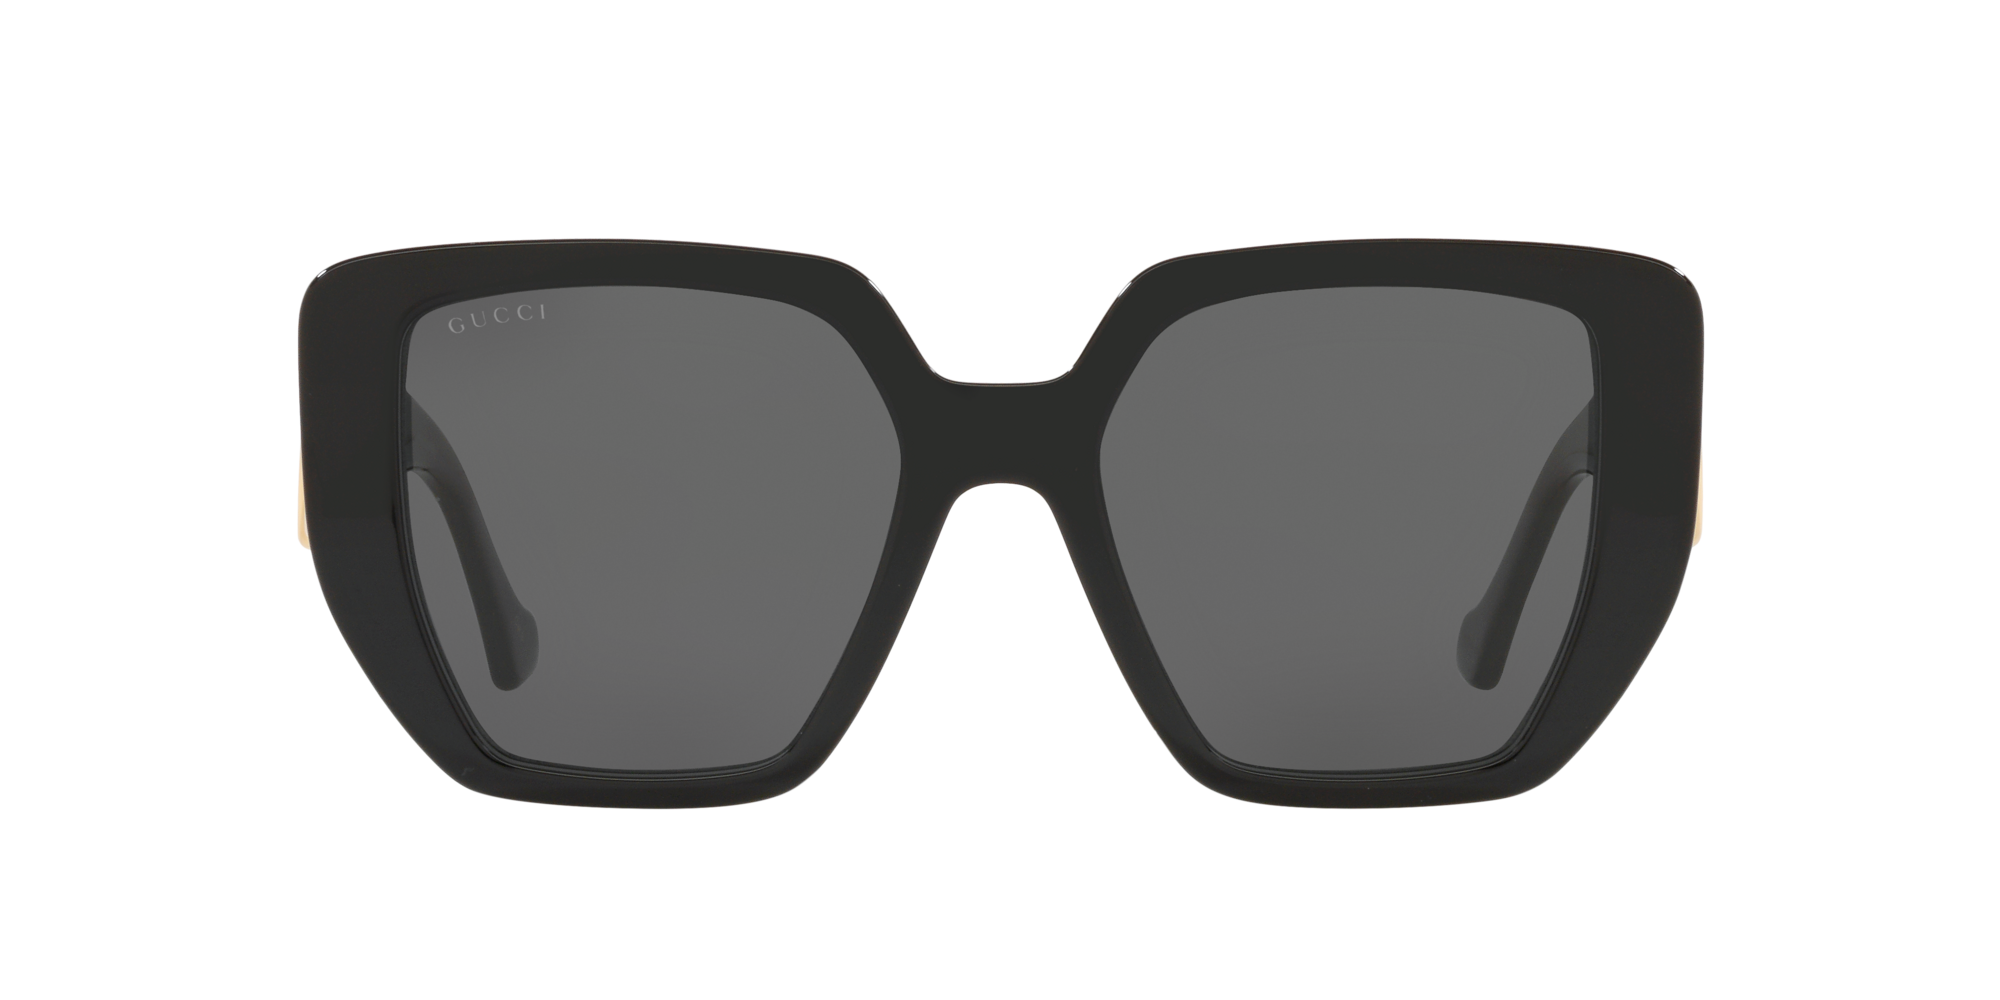 Gucci Square Sunglasses Tortise (GG0956S-007-FR)